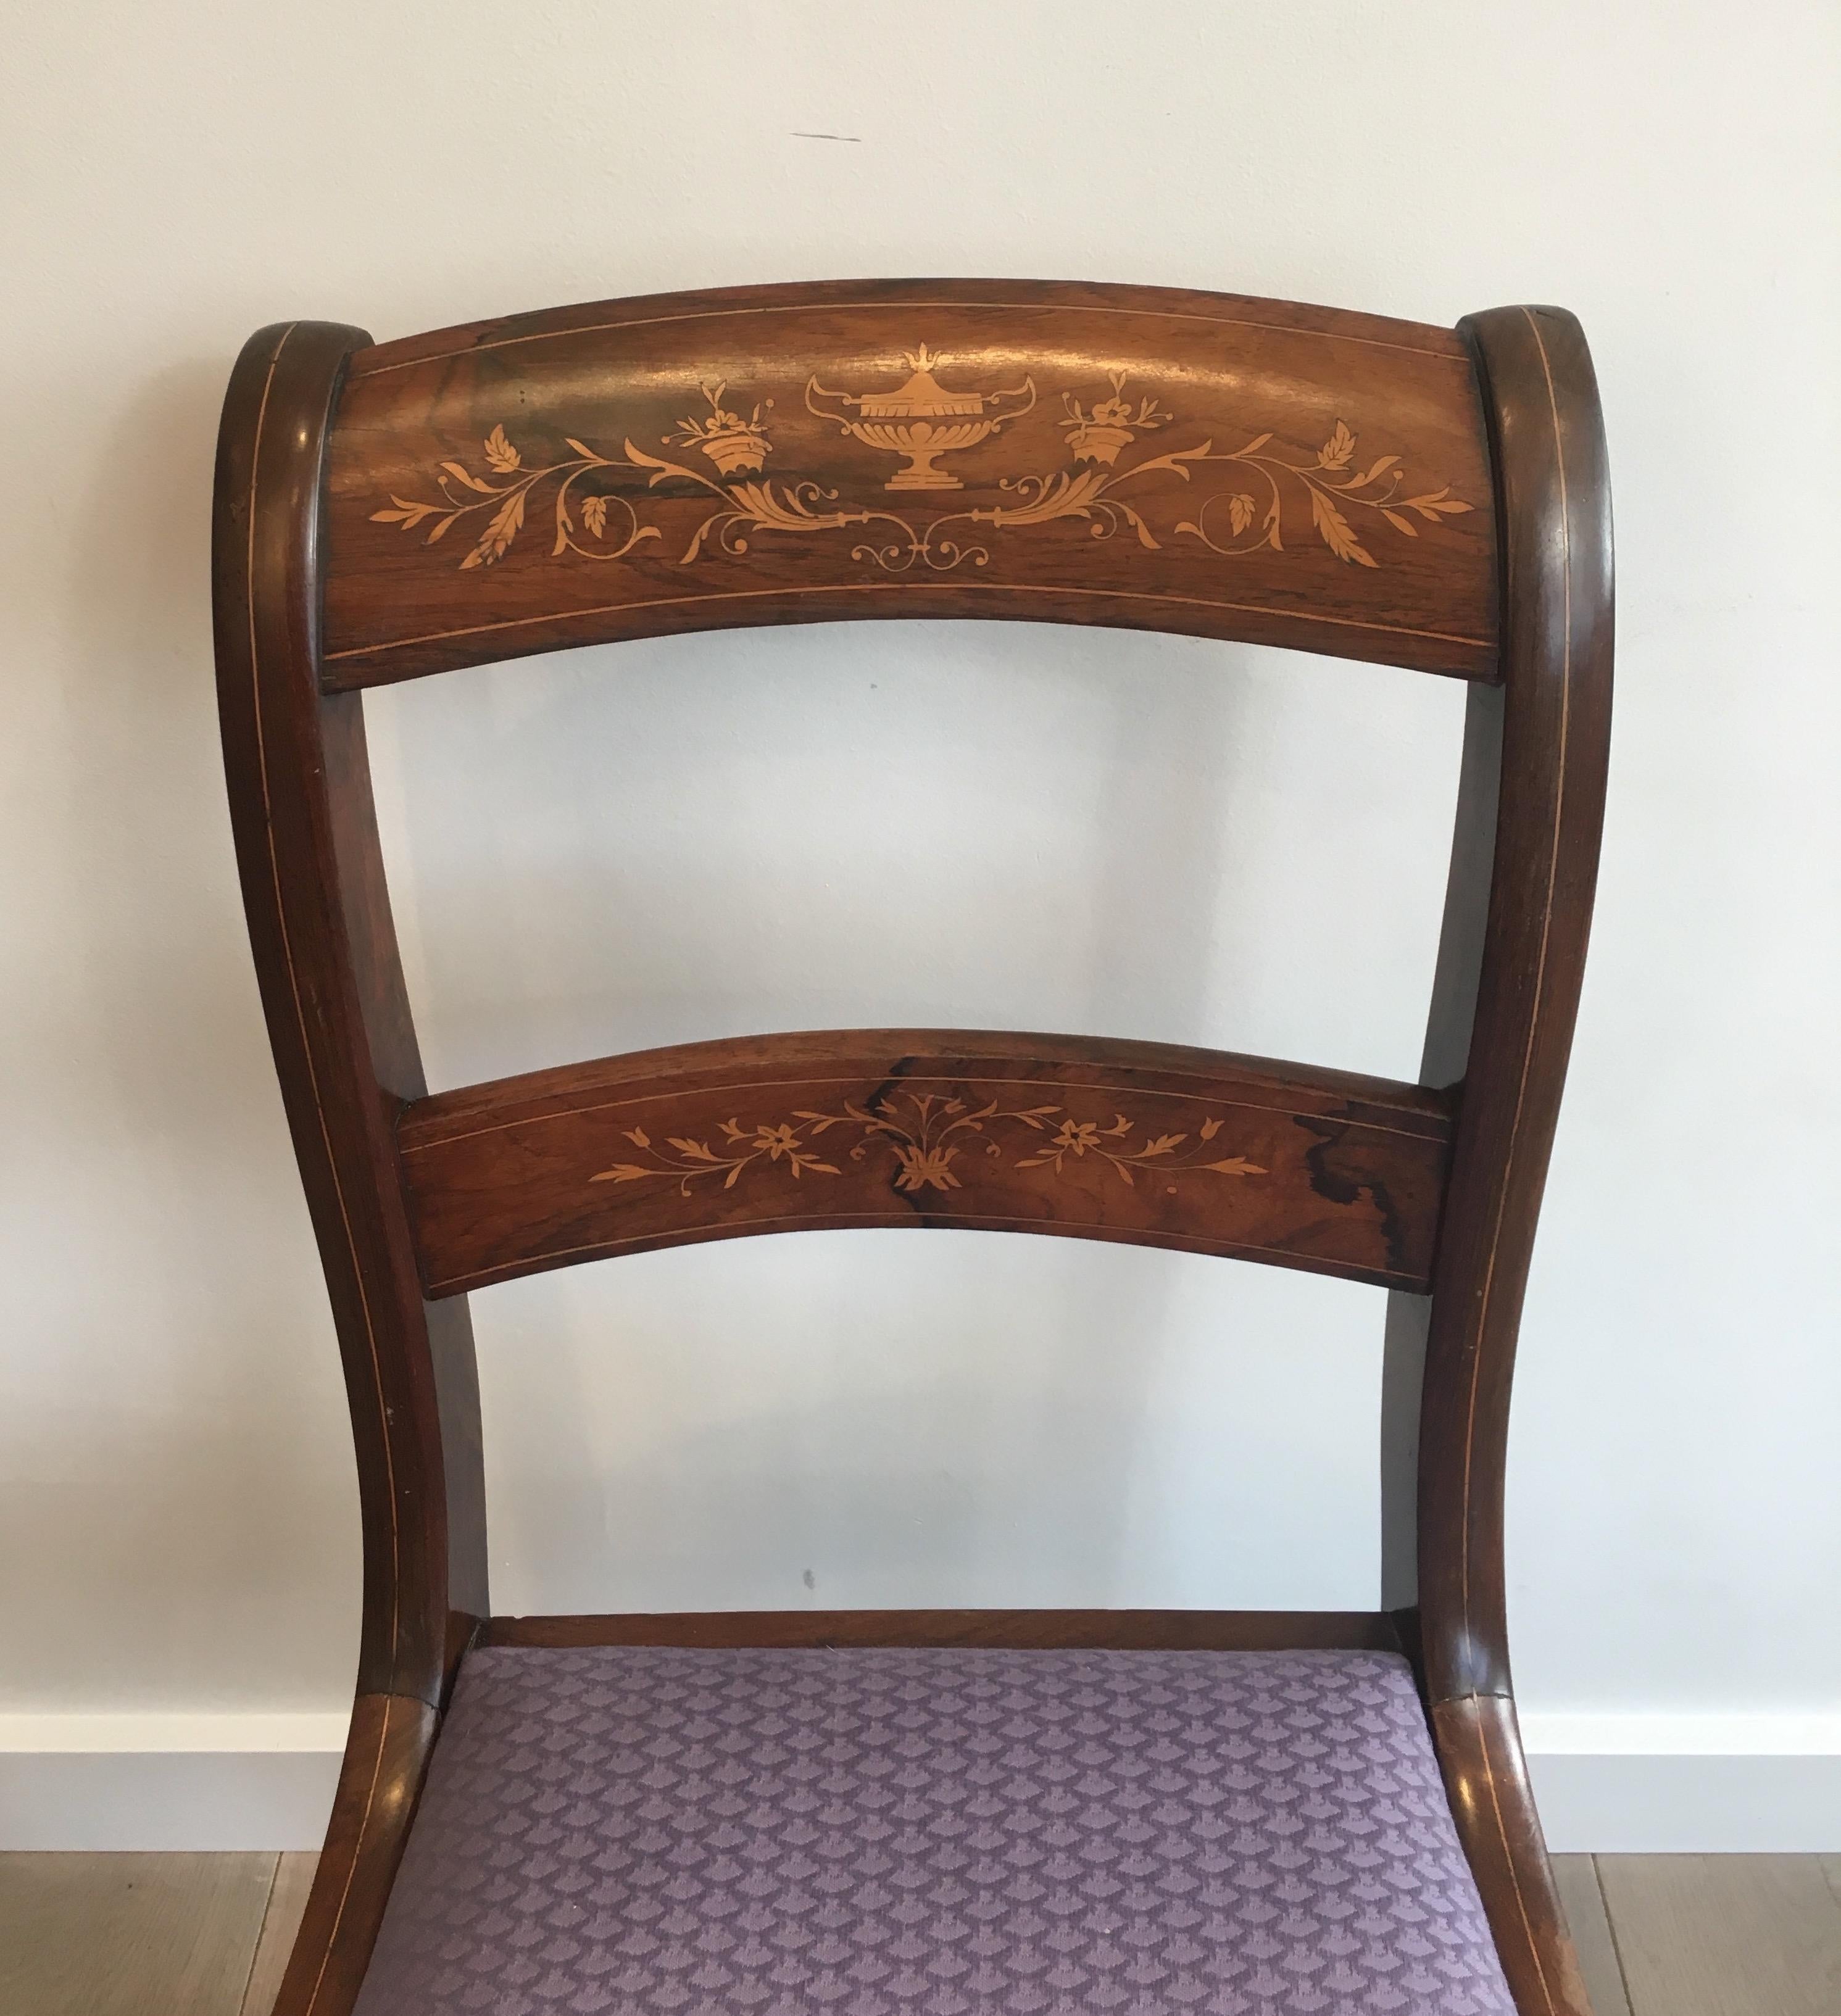 Charles X Charles the Xth Rosewood and Lemon Tree Chair Attributed to Jeanselme '3 Chairs'